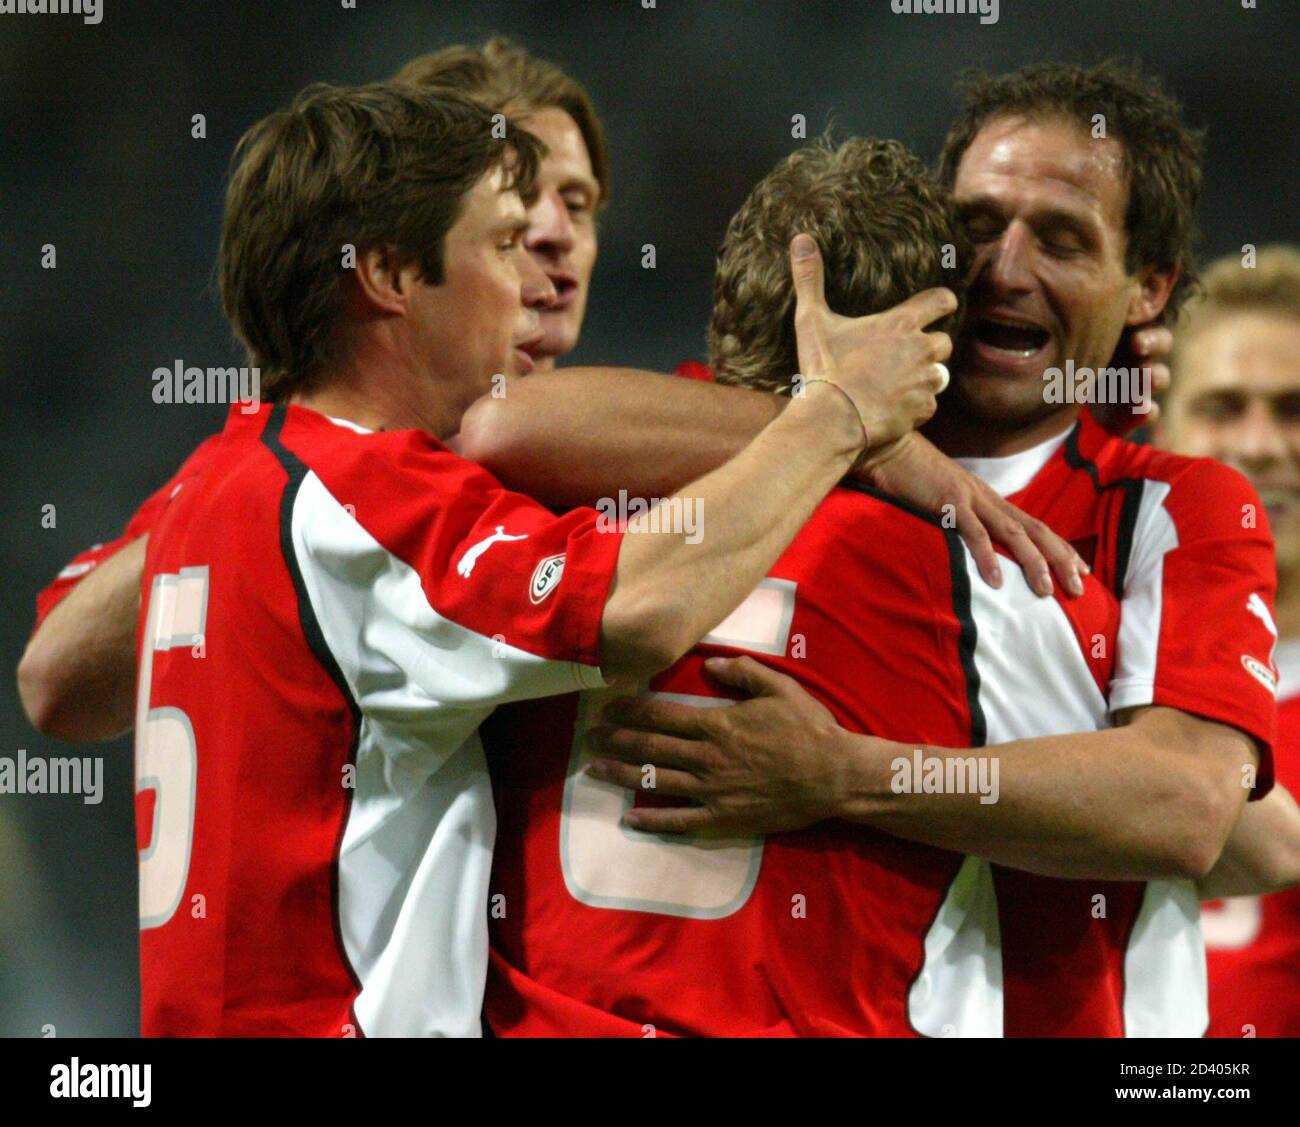 AUSTRIA'S CERNY,KIESENEBNER AND KIRCHLER CELEBRATE DURING THEIR FRIENDLY SOCCER MATCH AGAINST LUXEMBOURG IN INNSBRUCK.  Austria's Harald Cerny, Markus Kiesenebner and Roland Kirchler (L-R) celebrate during their friendly soccer match against Luxembourg in Innsbruck, Austria, April 28, 2004. REUTERS/Miro Kuzmanovic REUTERS Stock Photo